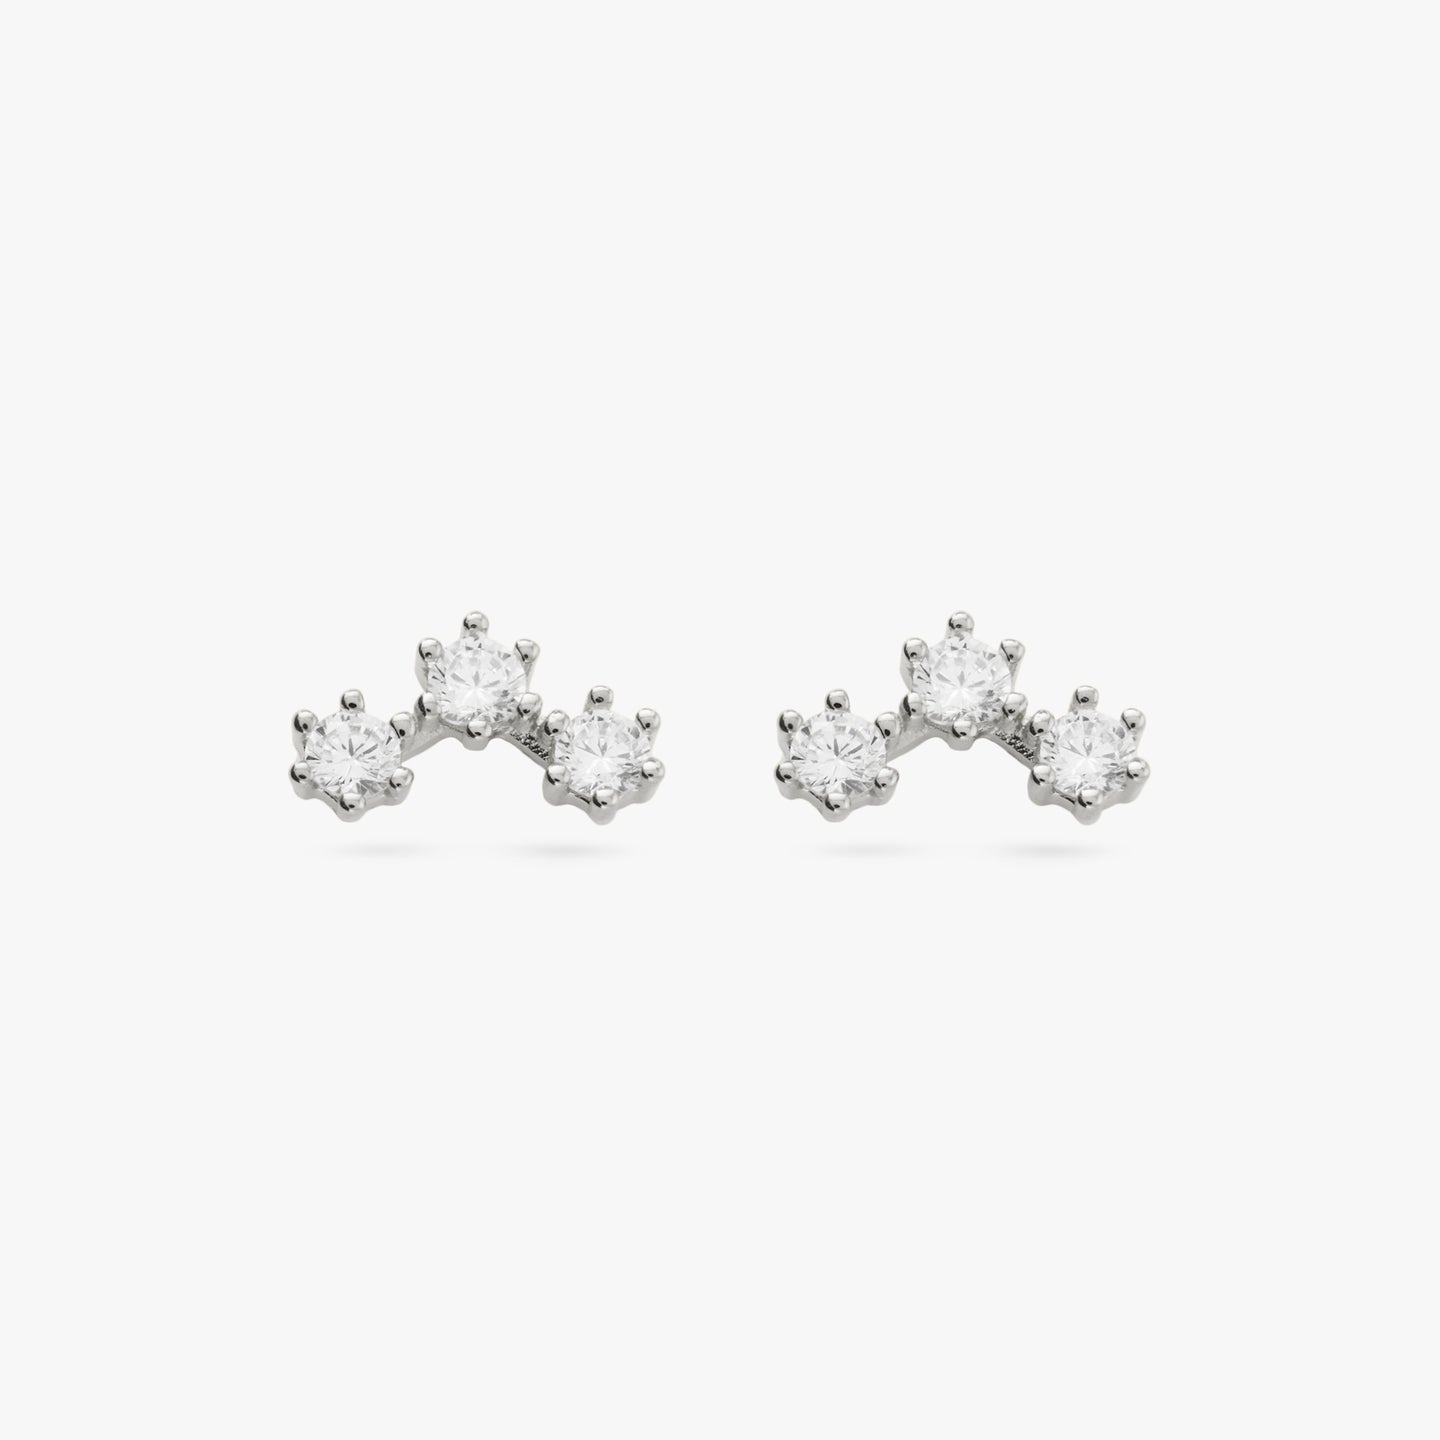 A pair of three cubic zirconia in an arch shaped silver cluster studs [pair] color:null|silver/clear